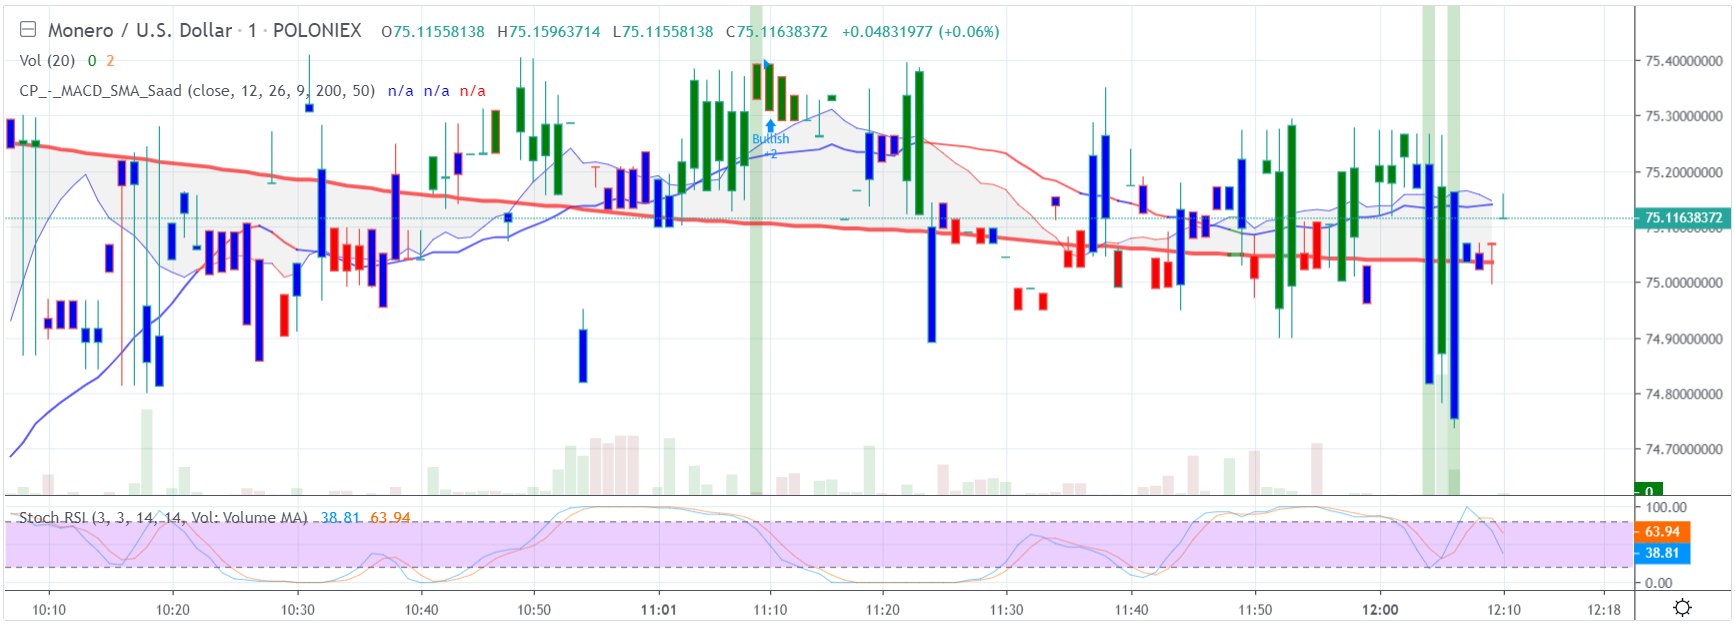 Monero price analysis: XMR dips are a means for rebound 2